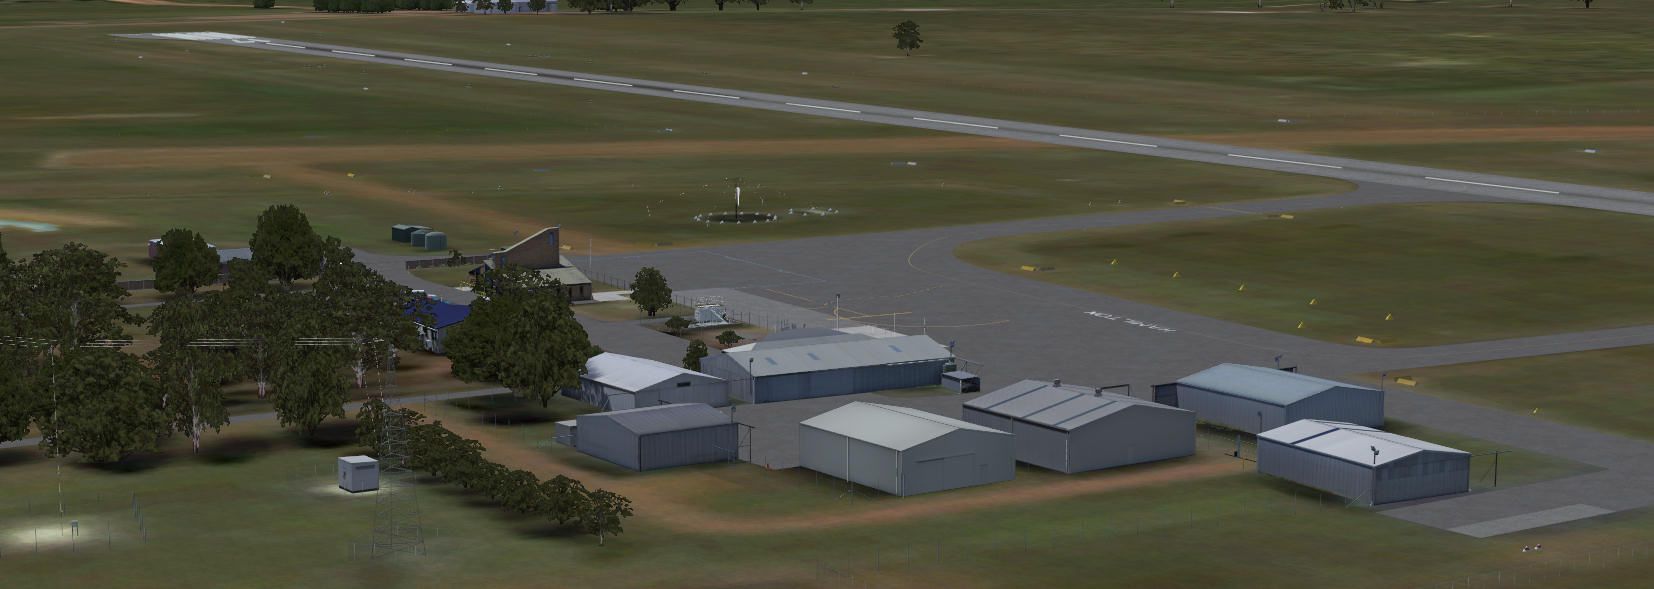 ants aussie airports 13 - yhml hamilton scenery for fsx